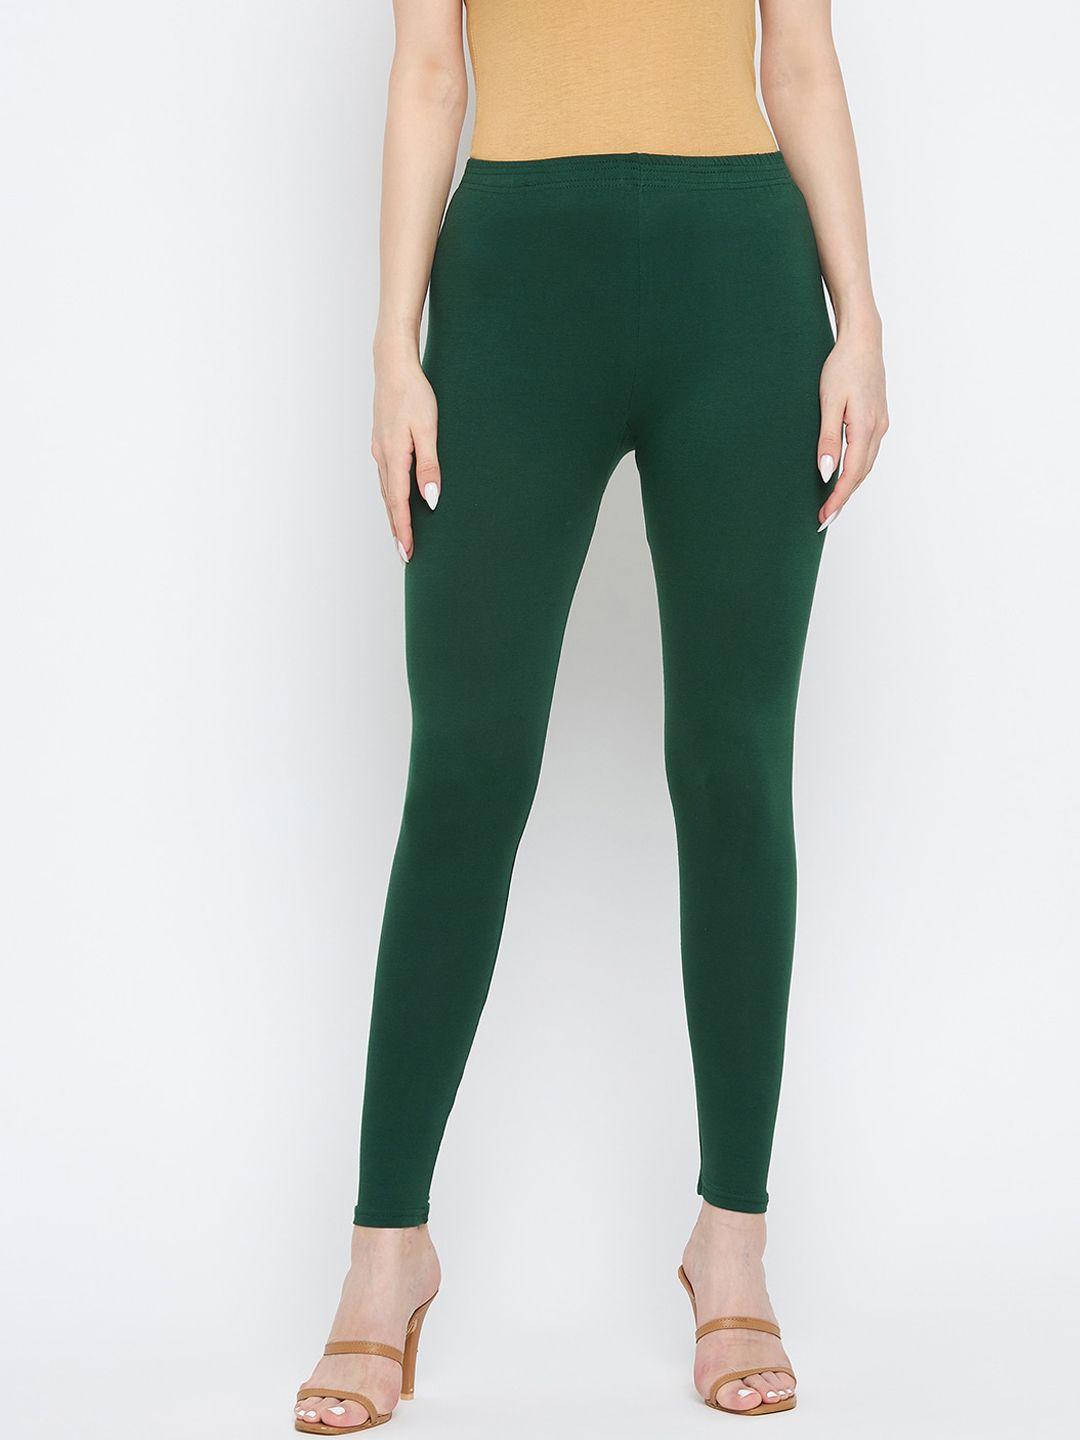 clora creation women green solid ankle length leggings